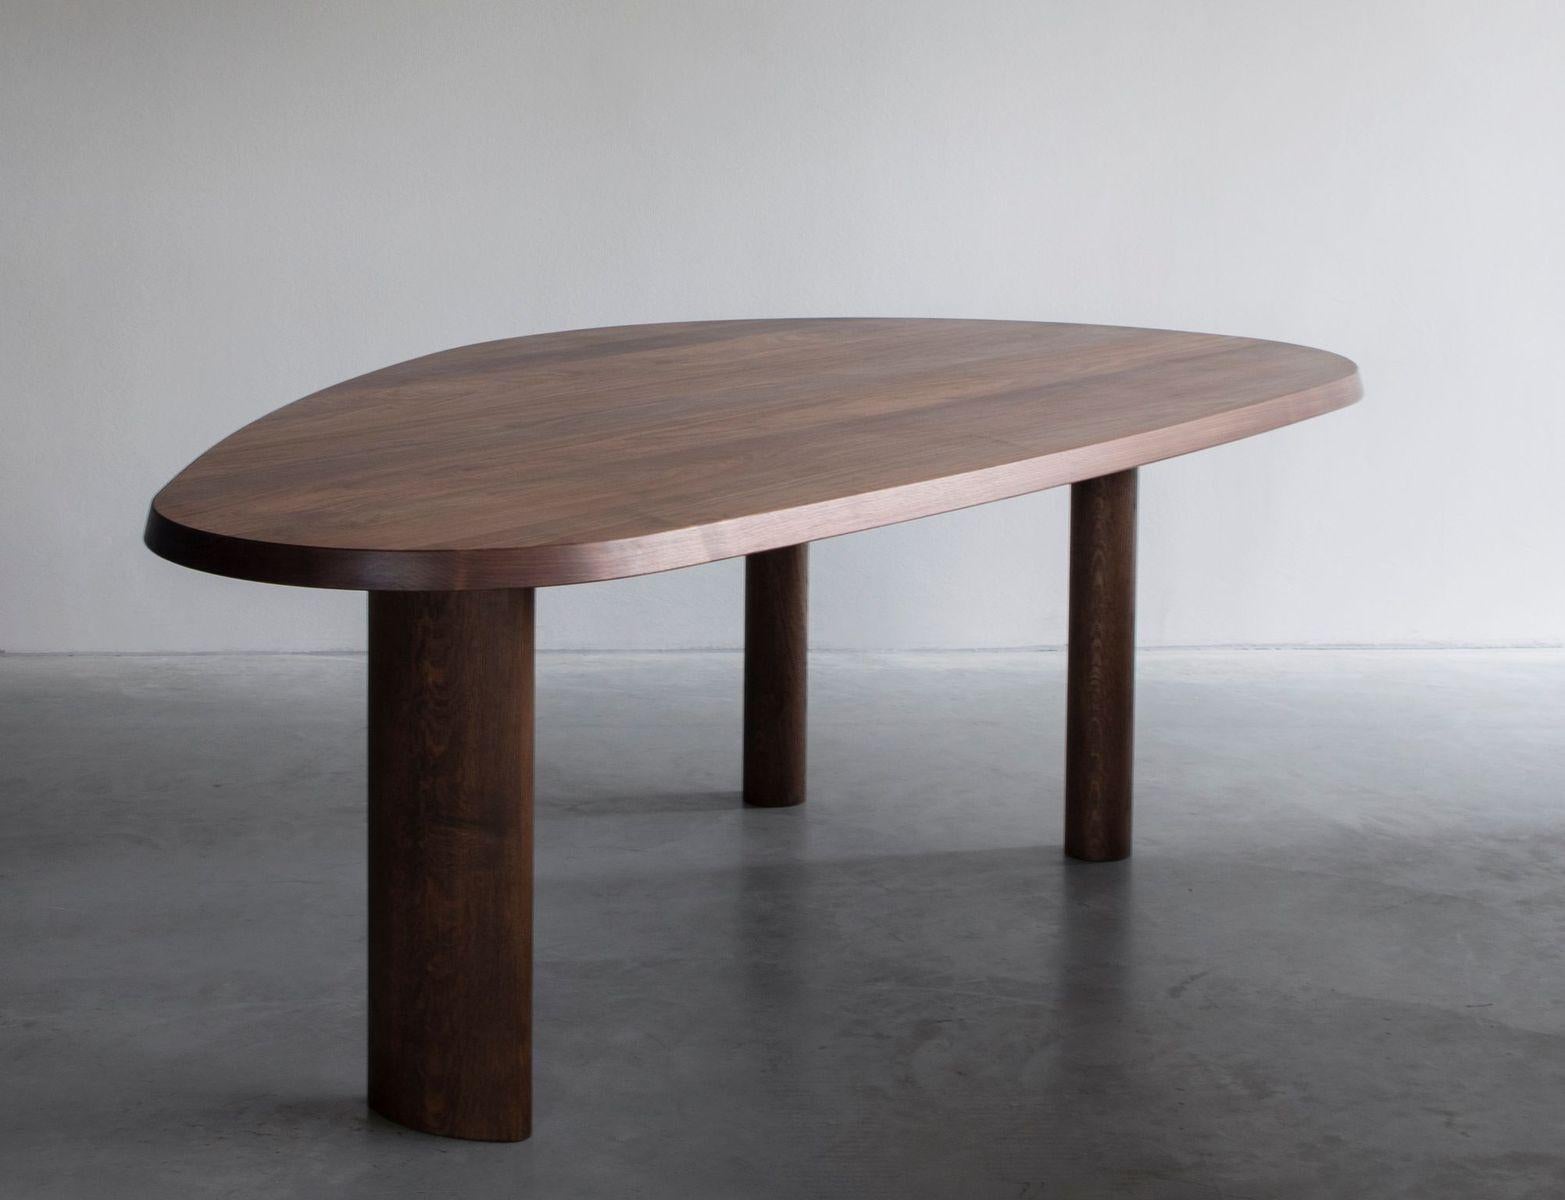 Kei walnut dining table by Van Rossum
Dimensions: D200 x W130 x H74 cm
Materials: Walnut.

The wood is available in all standard Van Rossum colors, or in a matching finish to customer’s own sample.

Inspired by Charlotte Perriand’s tables en